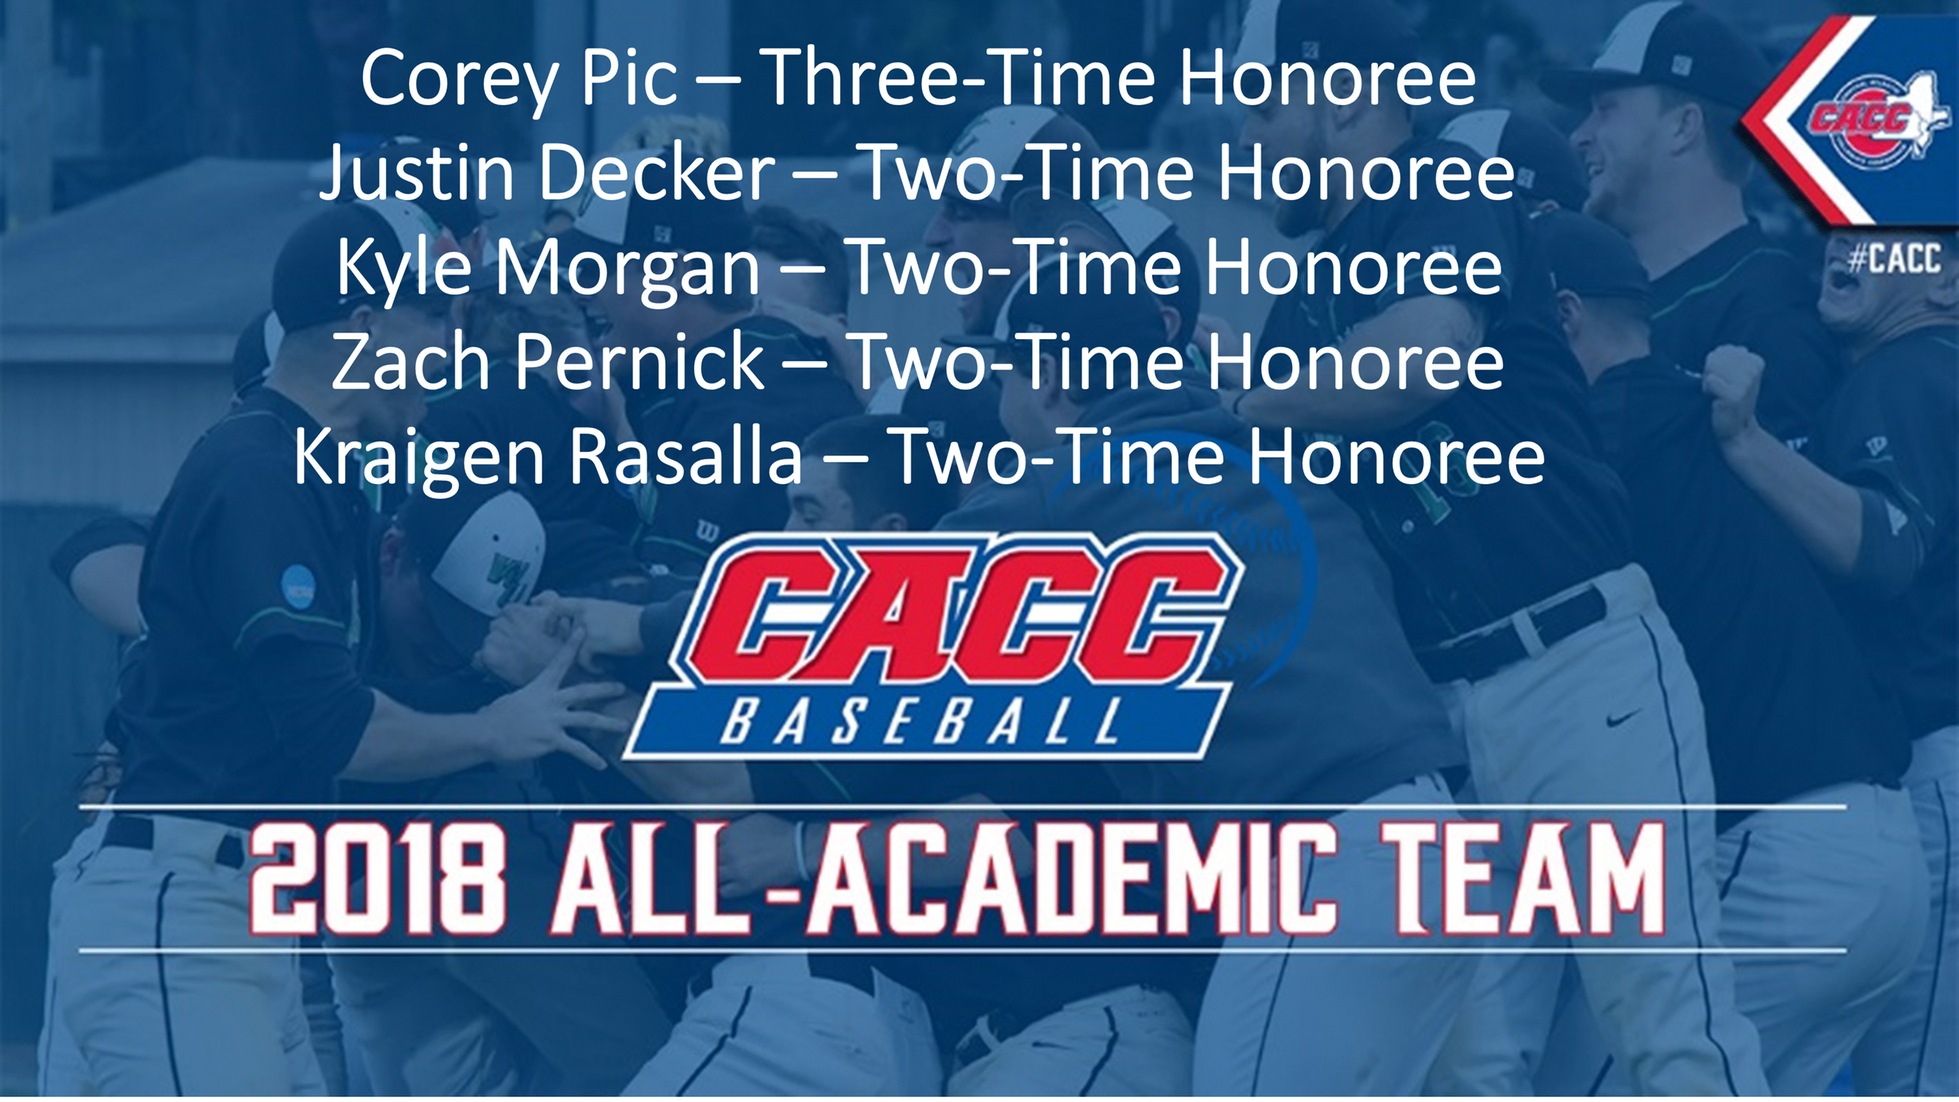 The CACC released the 2018 CACC Baseball All-Academic Team.